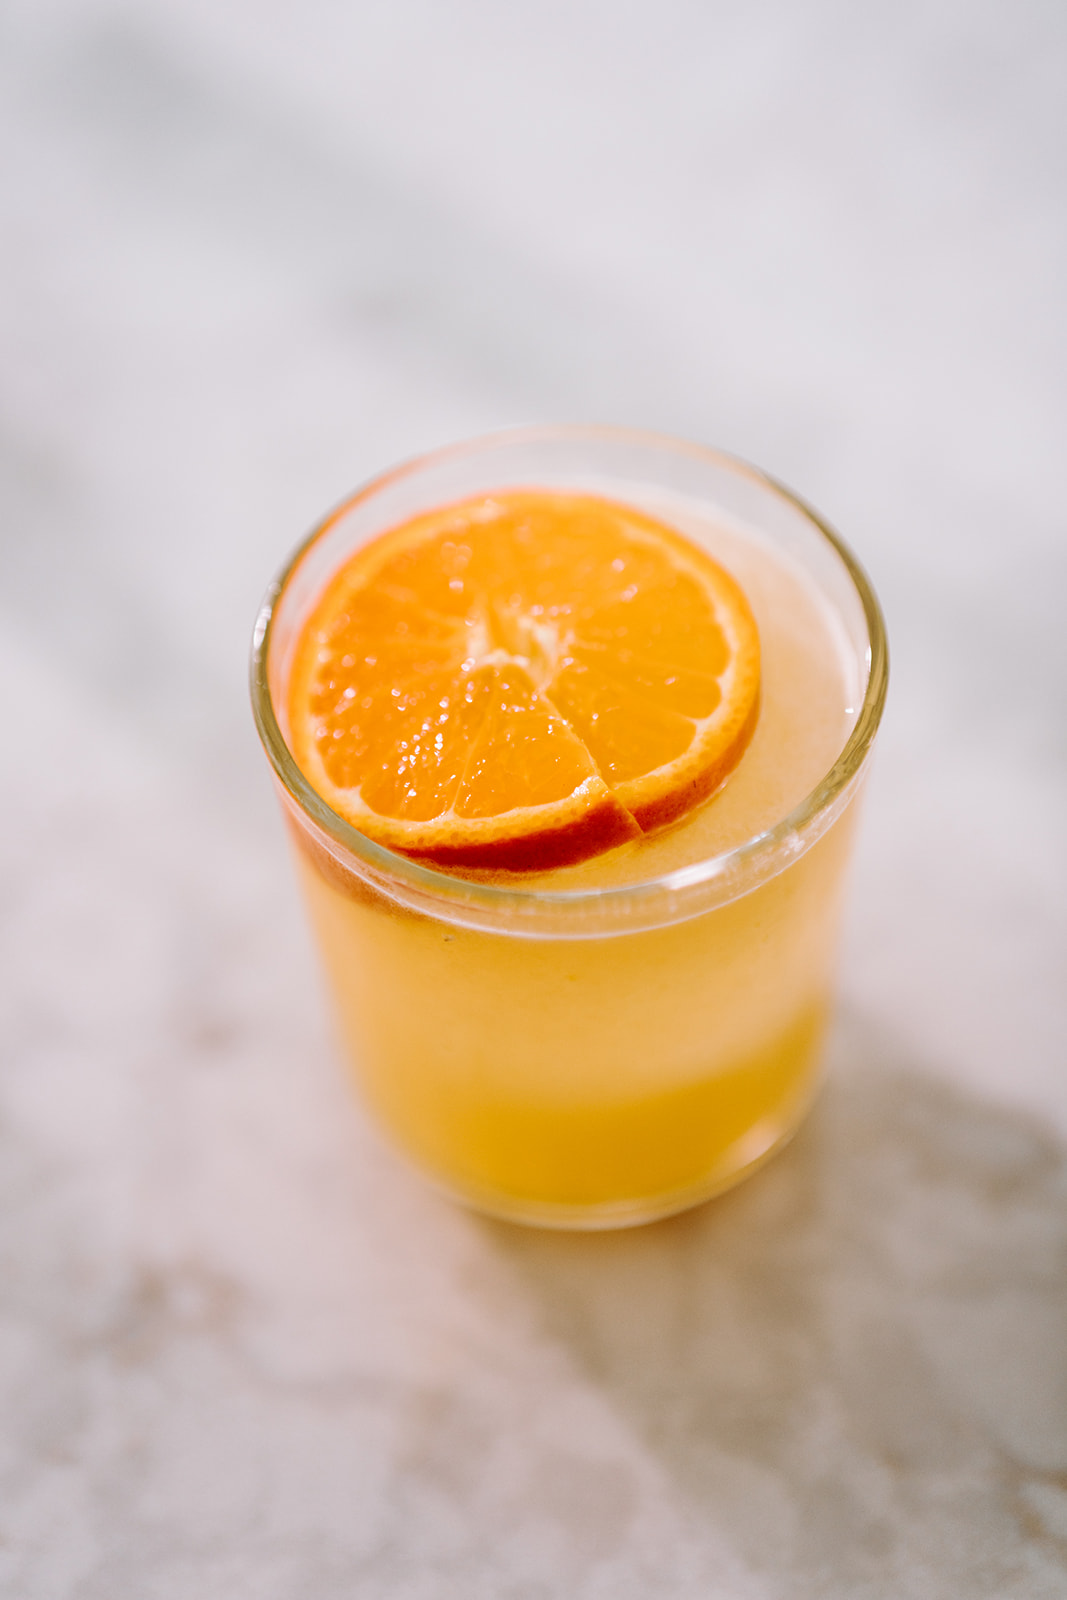 This simple and refreshing orange ginger margarita combines fresh squeezed orange juice, ginger simple syrup and tequila to make your new favorite margarita! Get the recipe on the blog kirstenturk.com